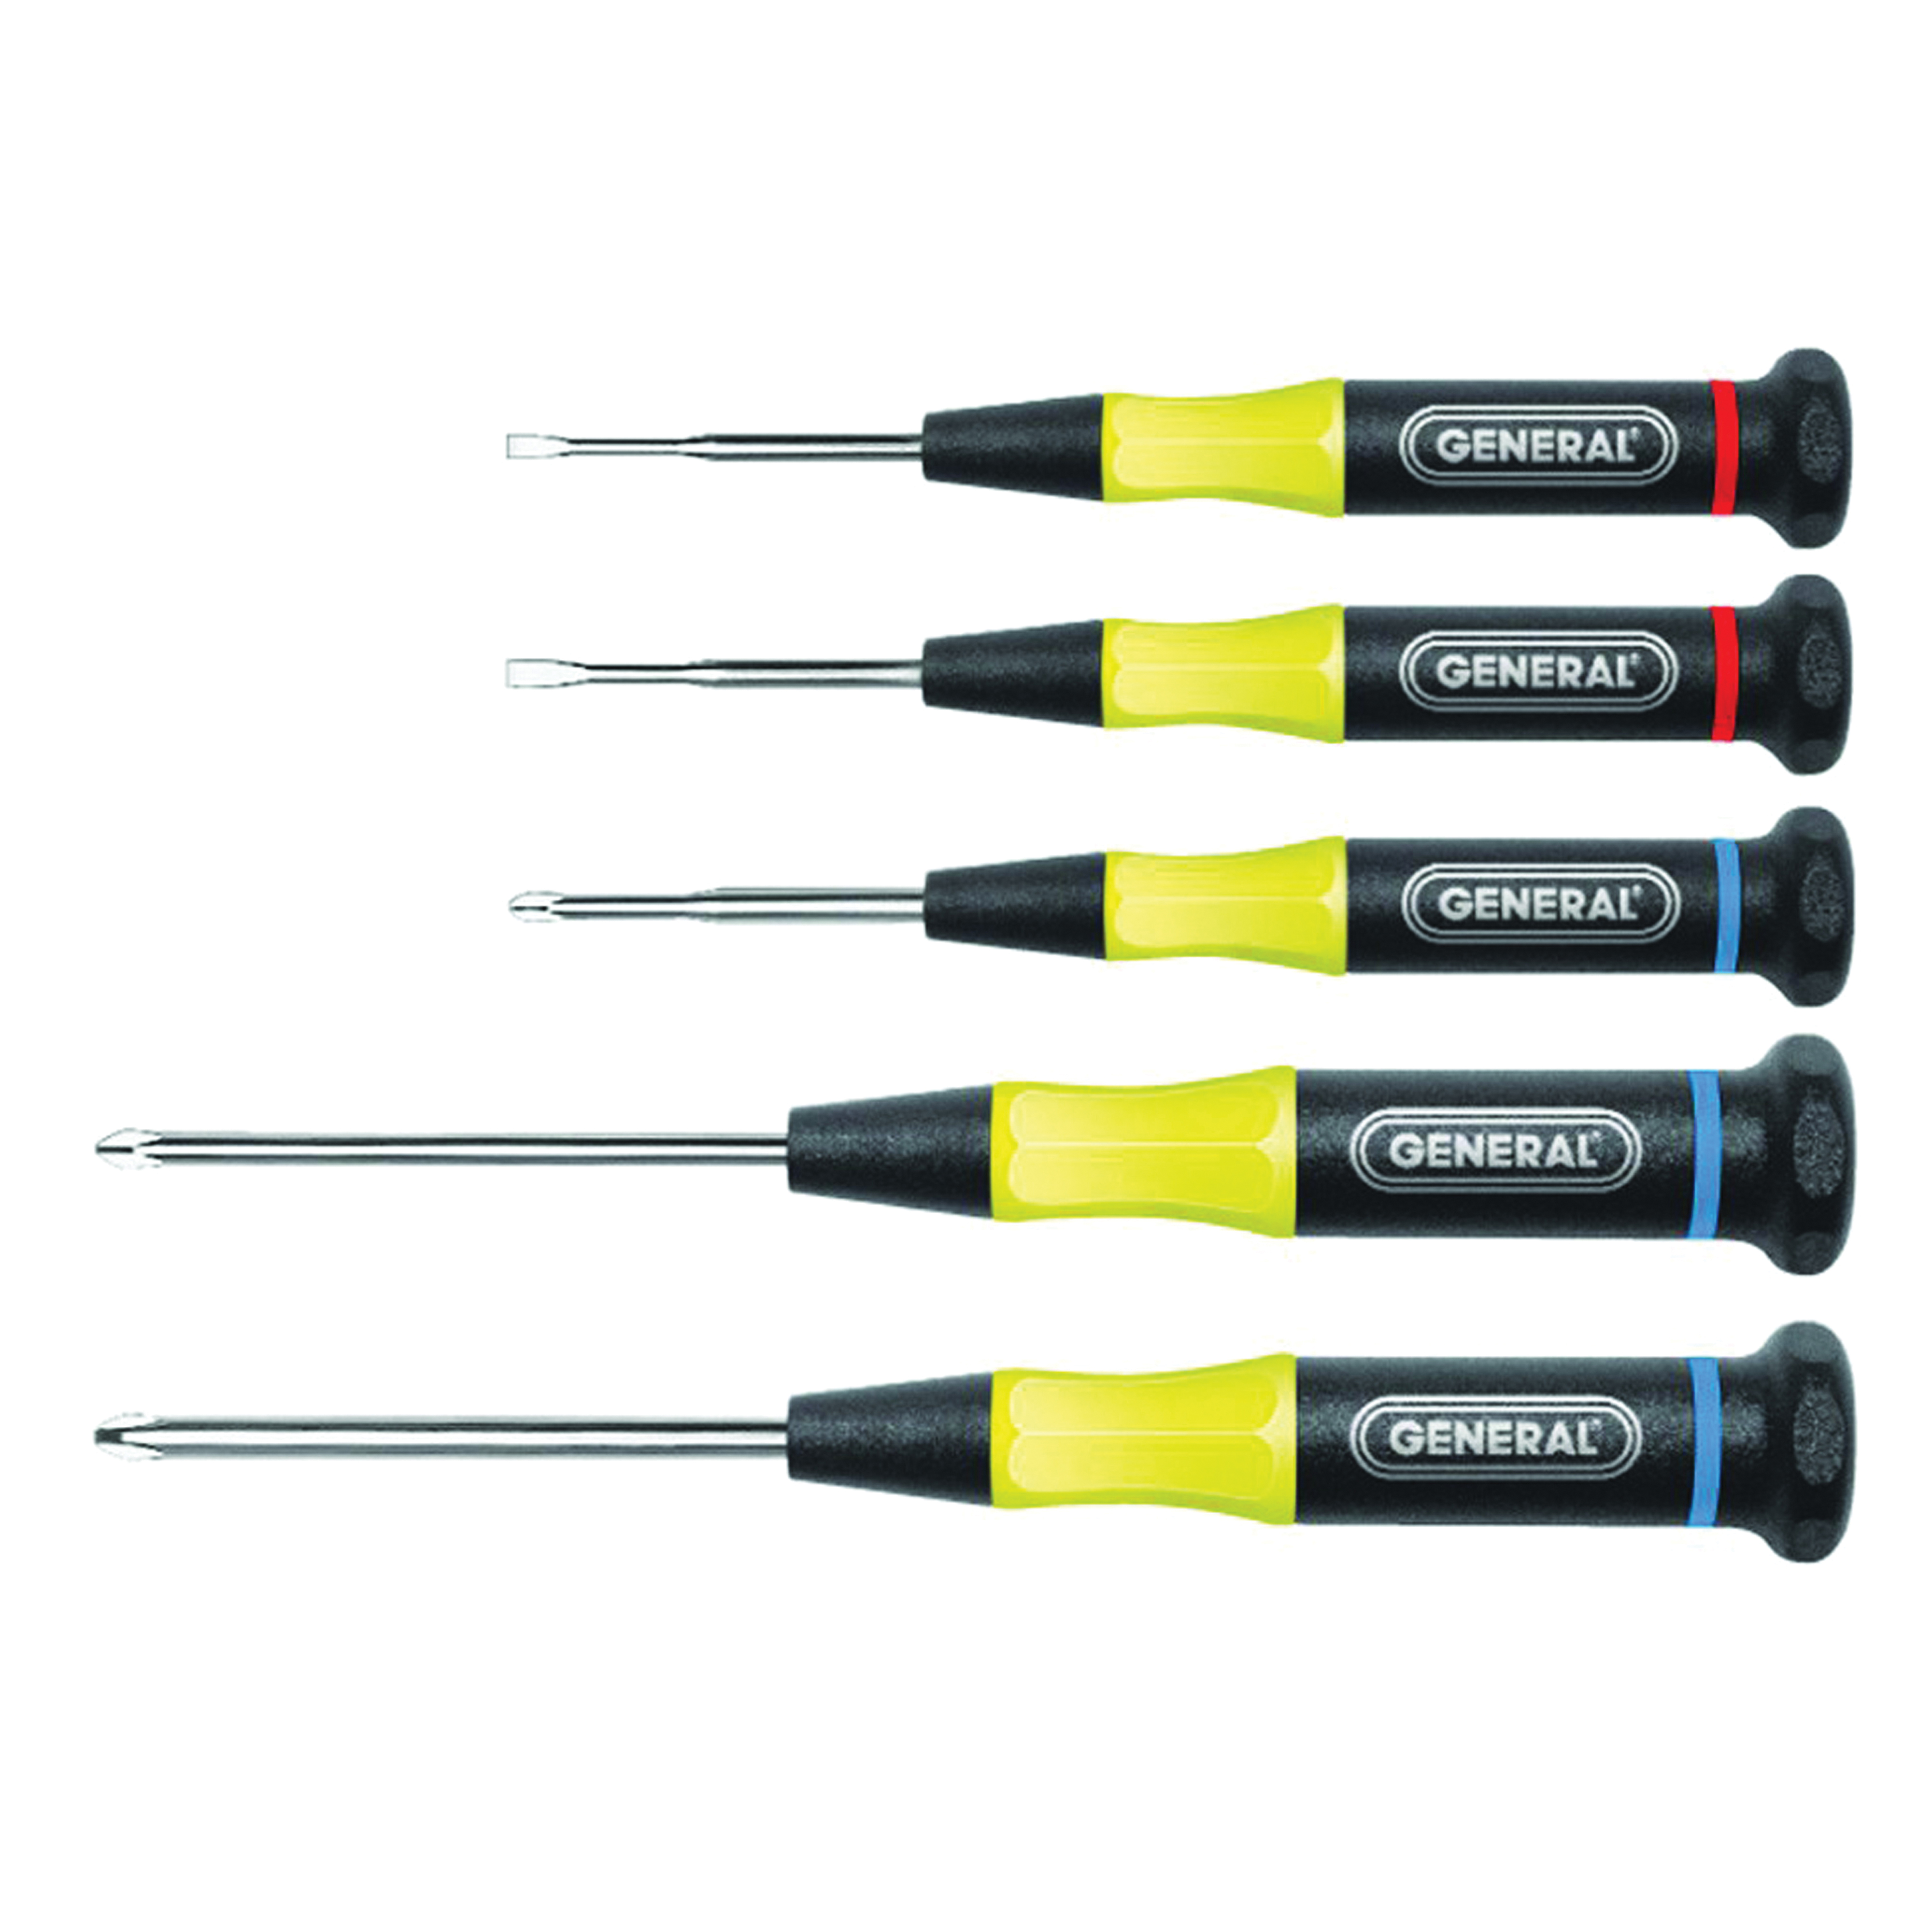 General 700 Screwdriver Set, Steel, Chrome, Specifications: Round Shank